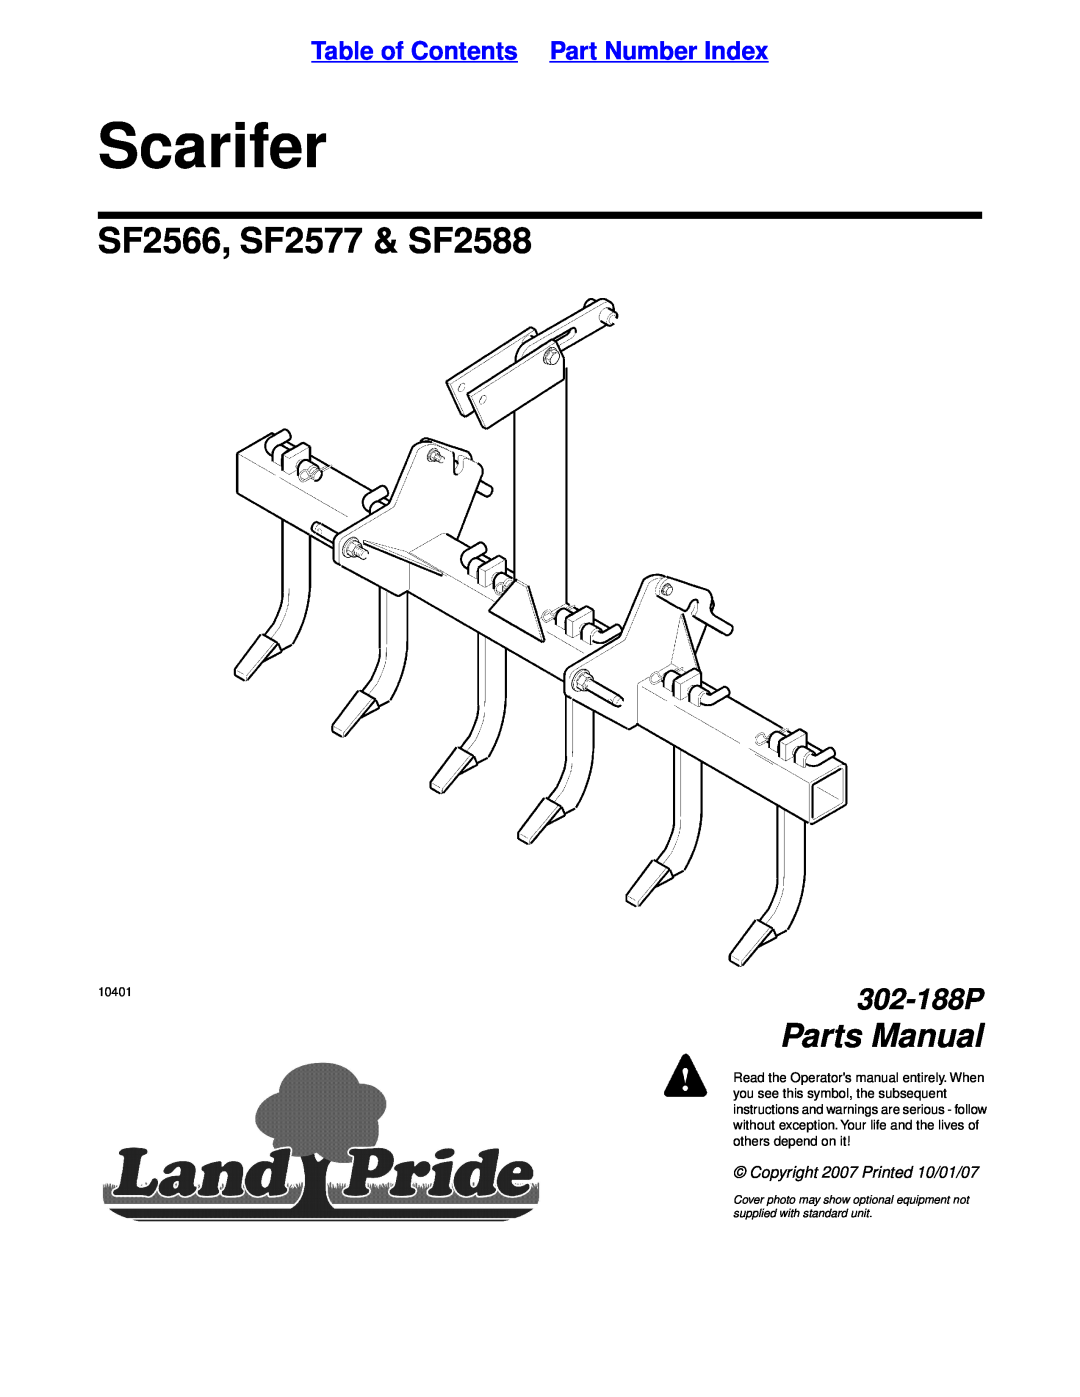 Land Pride manual Table of Contents Part Number Index, Scarifer, SF2566, SF2577 & SF2588, Parts Manual, 302-188P 